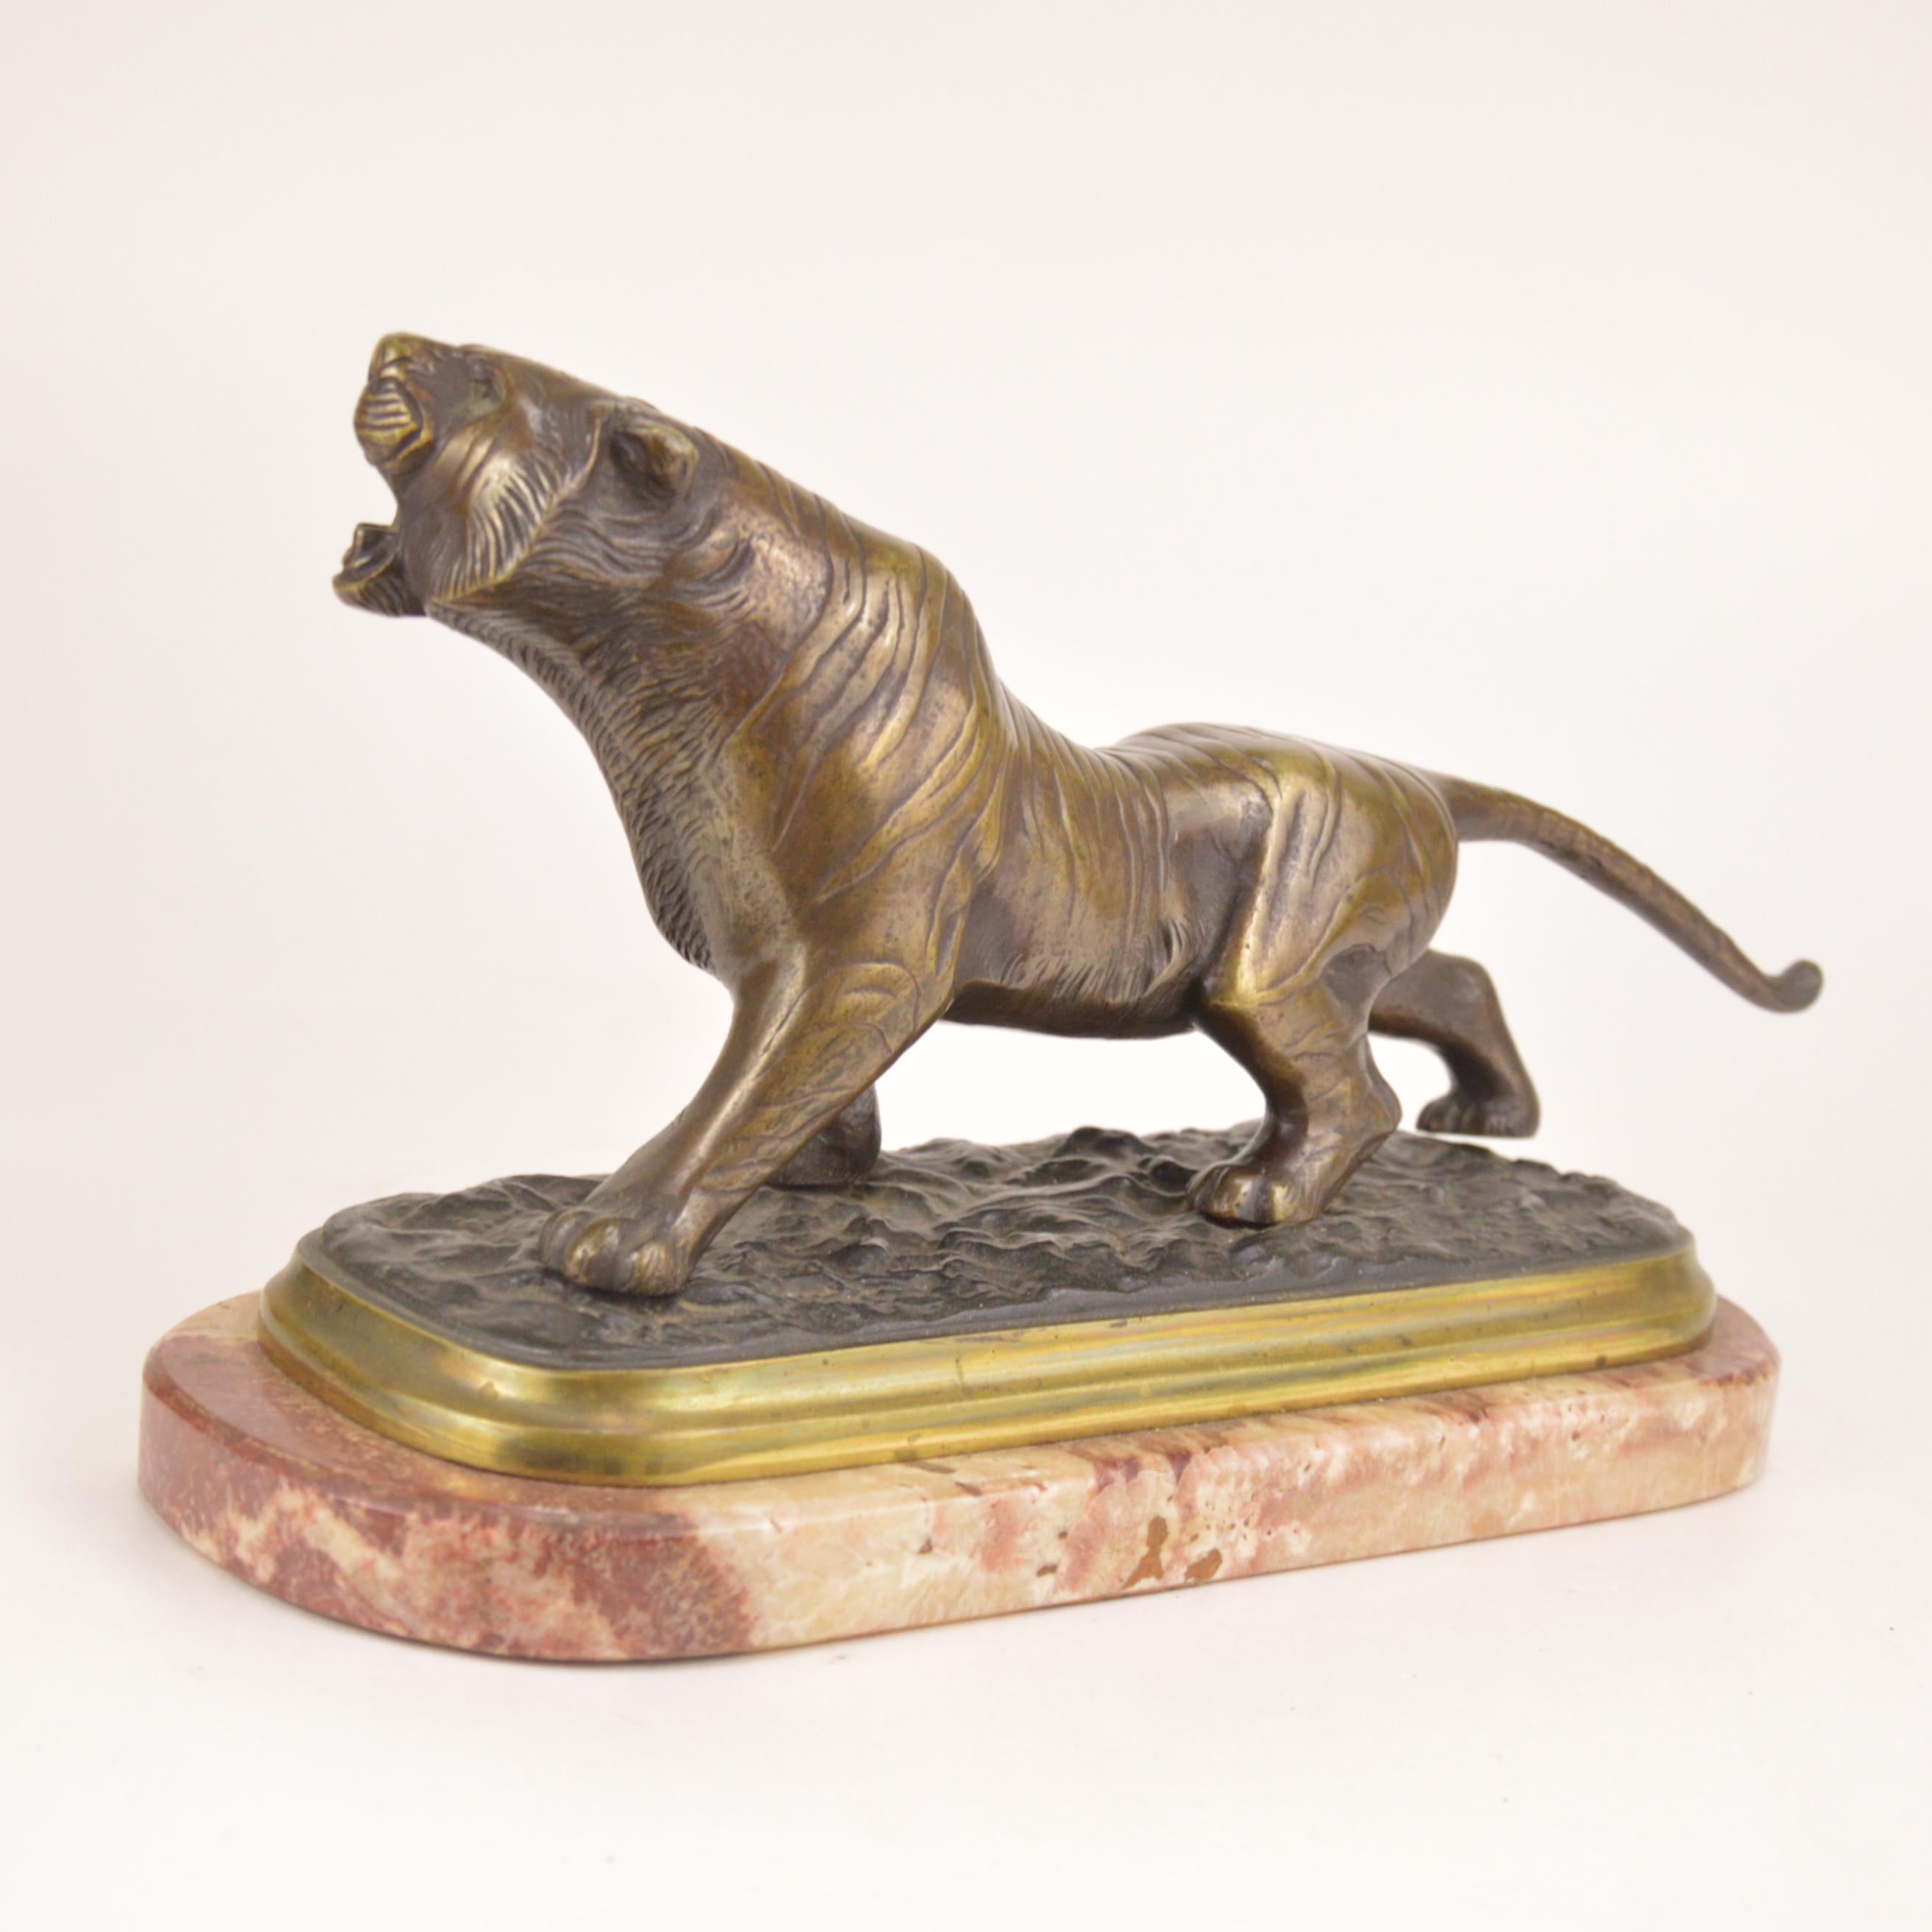 French Patinated Art Deco Bronze Sculpture Representing a Roaring Tiger, 20th Century